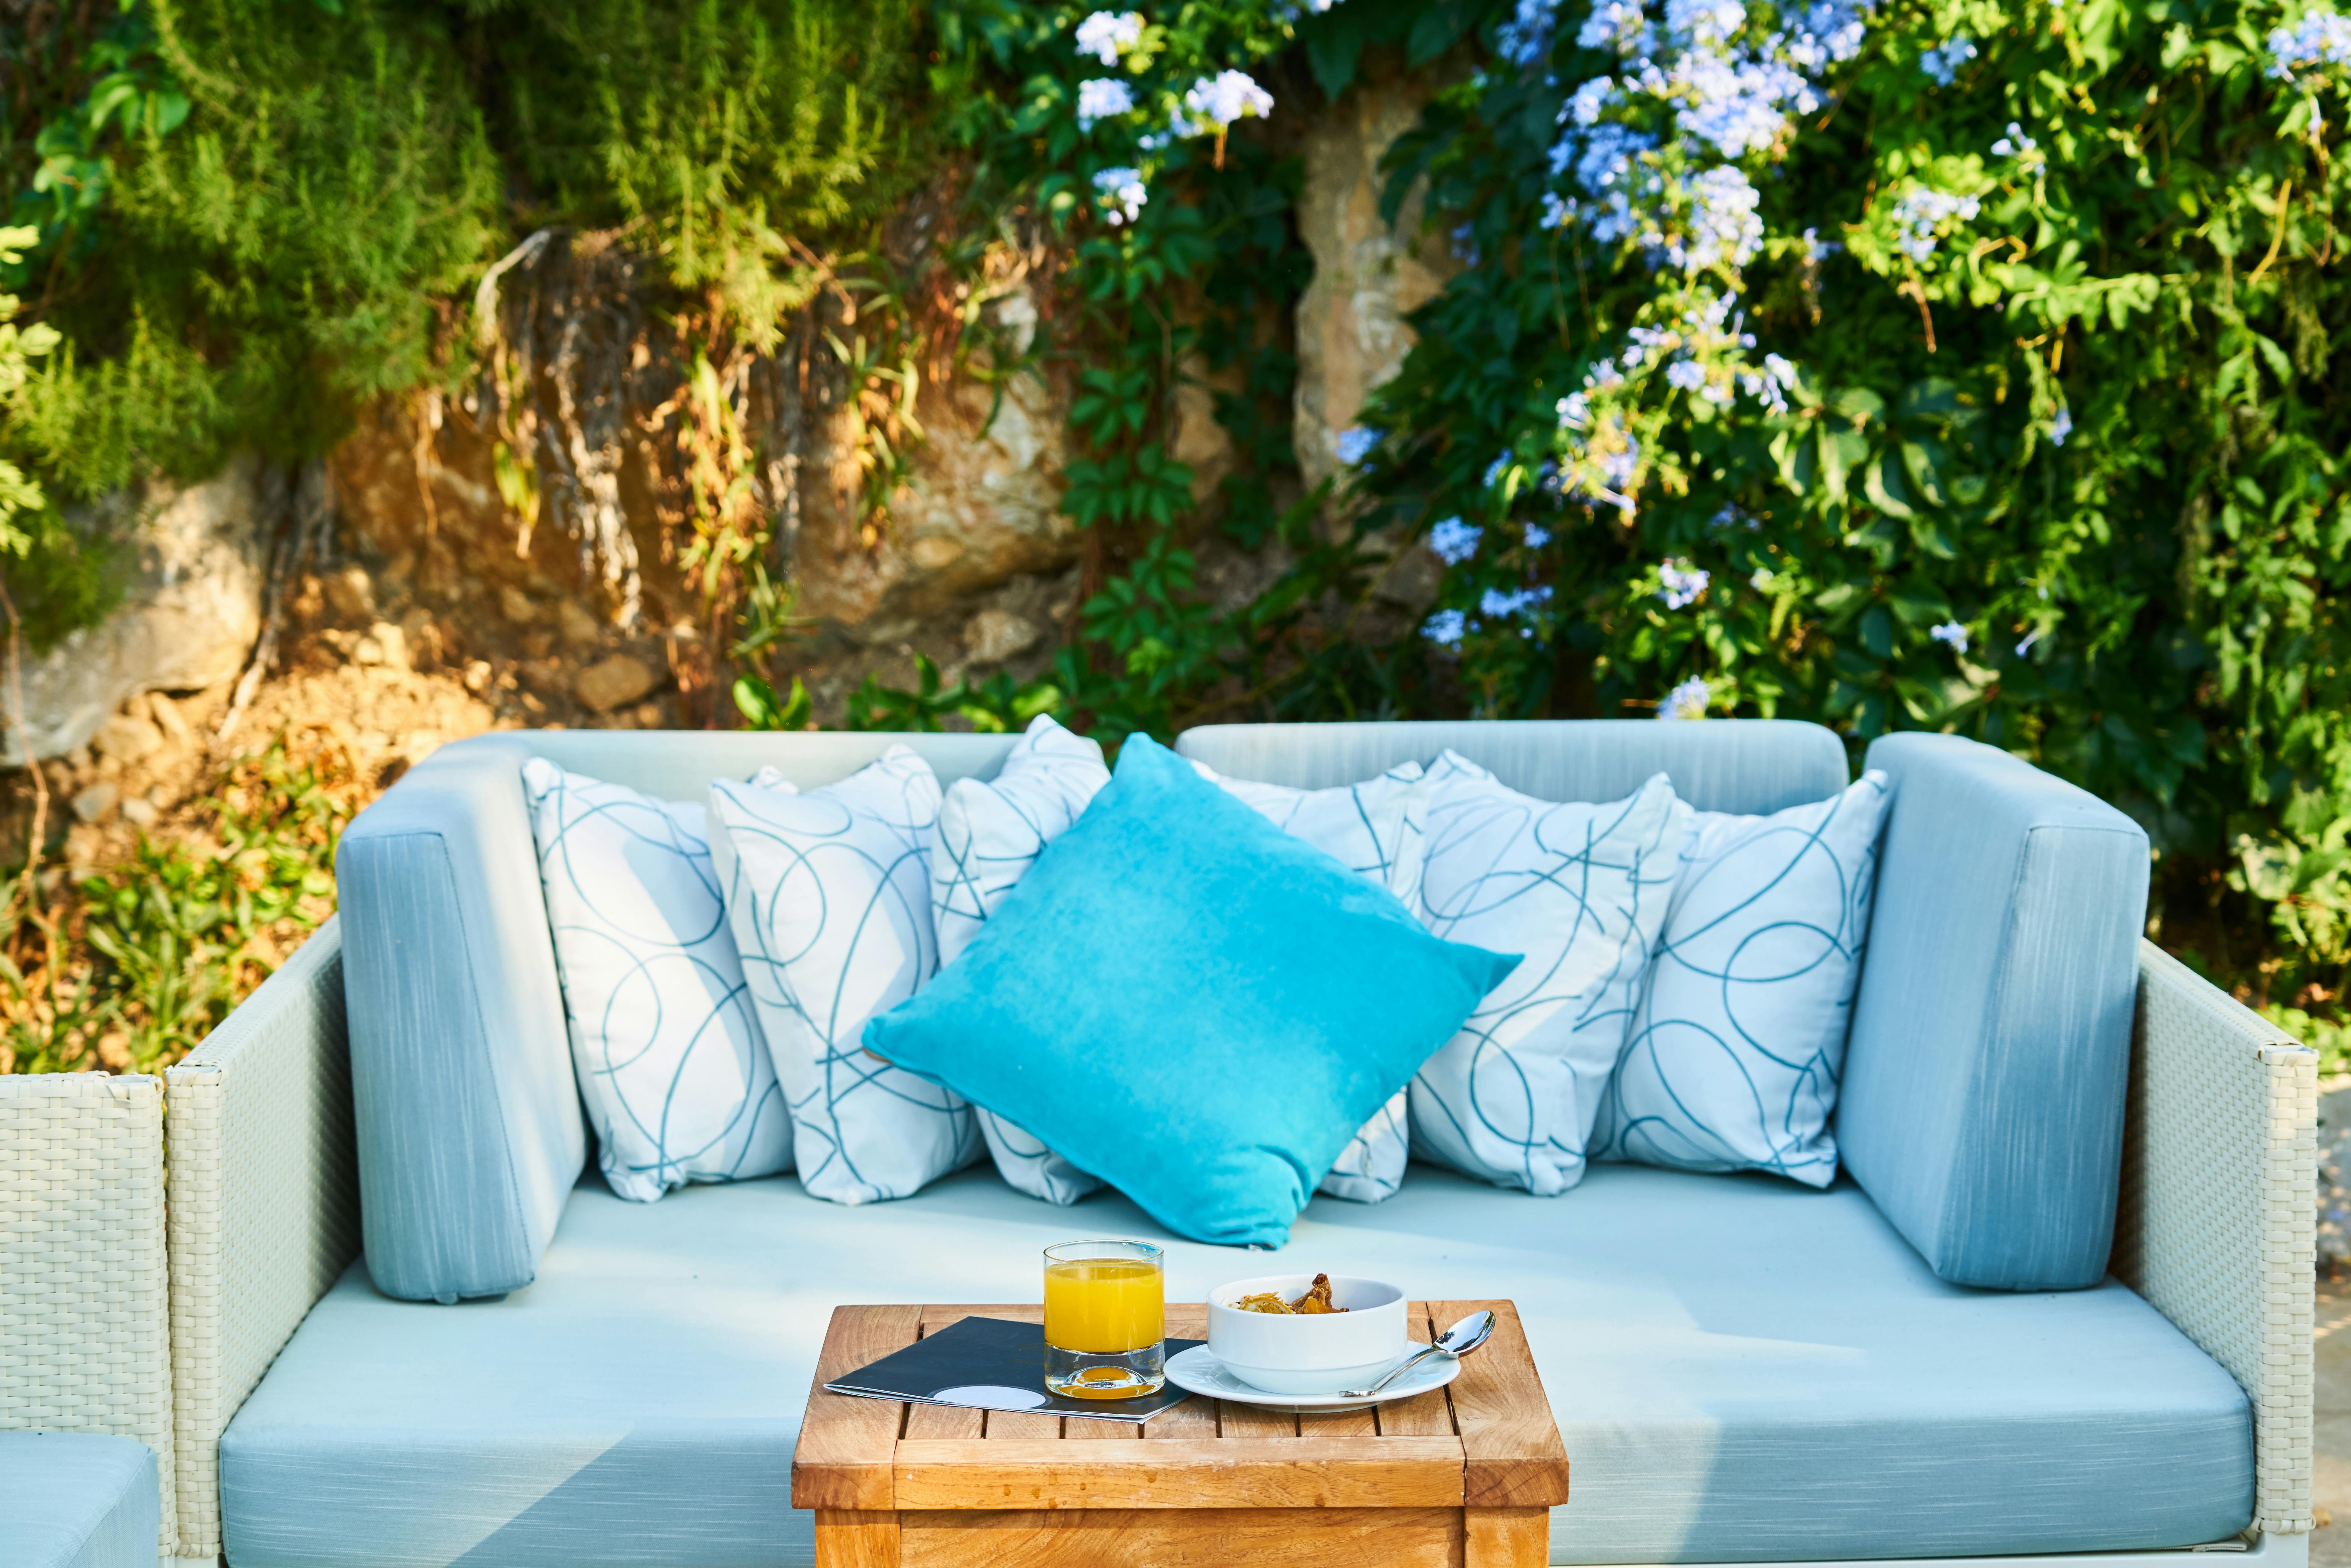 spring-themed outdoor seating with pillows on a bench